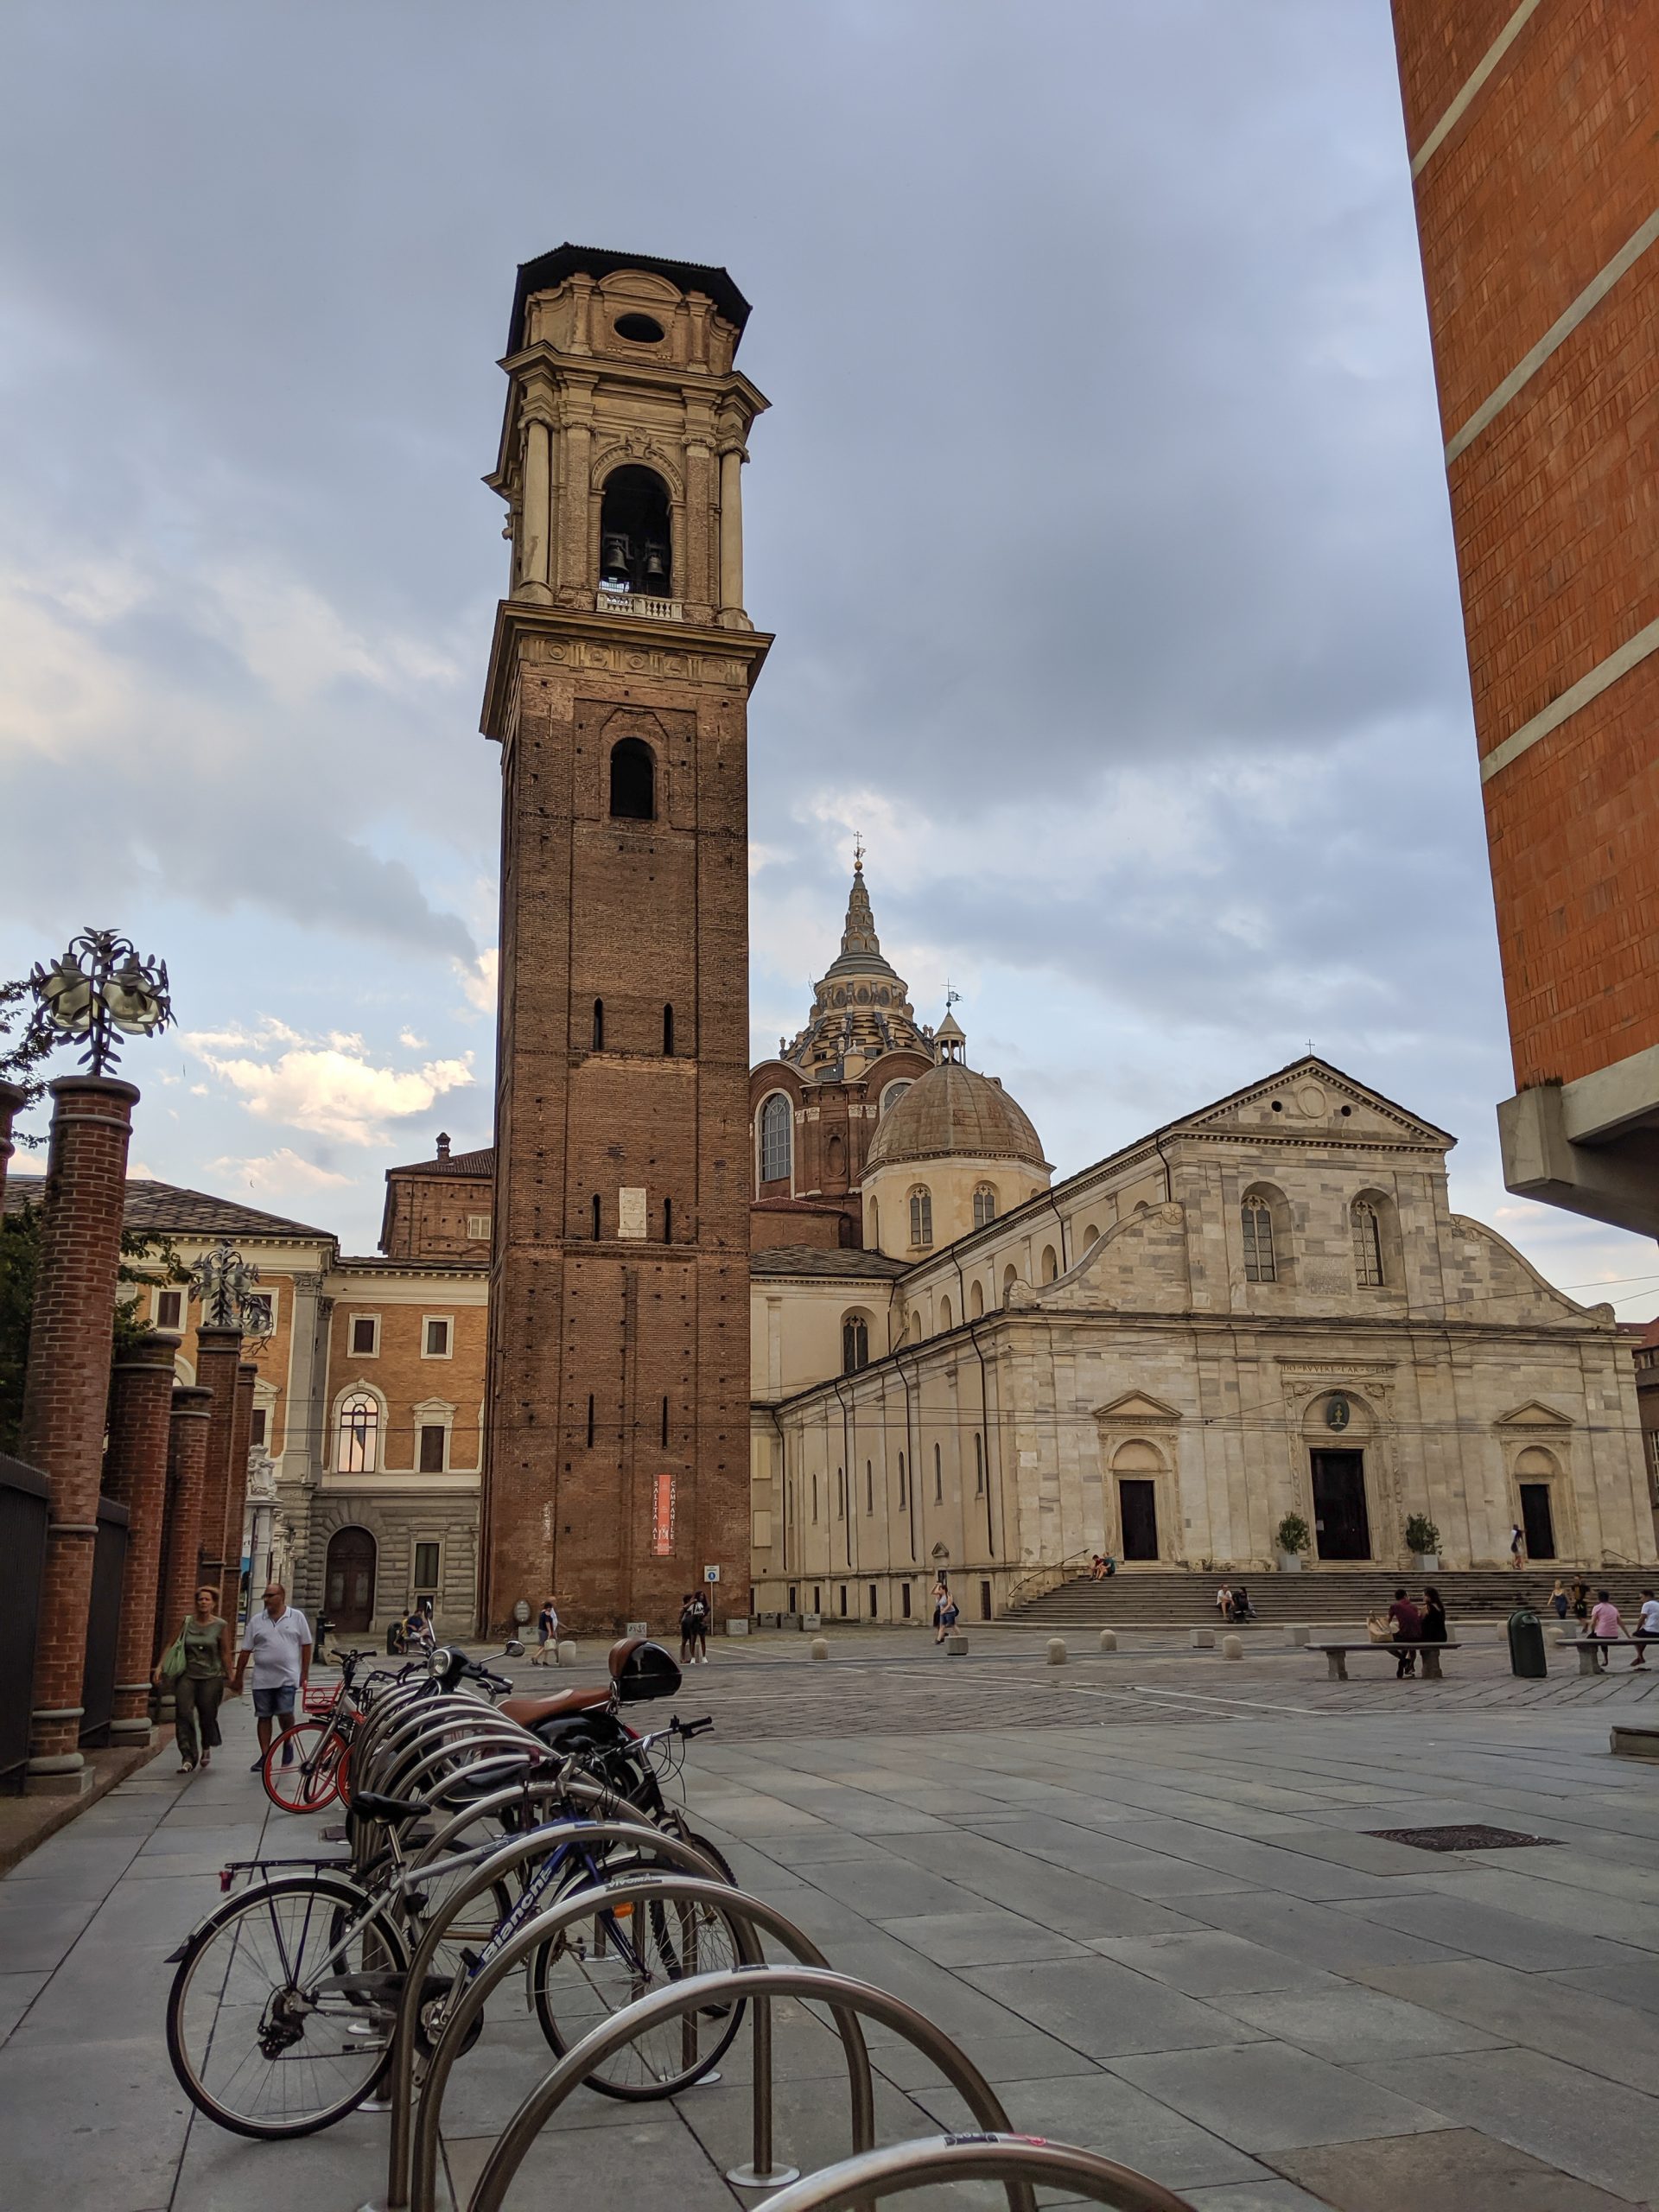 Turin Cathedral bell tower | How to Spend 2 Days in Turin, Italy (Torino) | 2-Day Itinerary plus helpful tips | Where to stay in Turin, Things to do in Turin, the capital of the Piedmont region | #turin #torino #italy #weekendinturin #traveltips